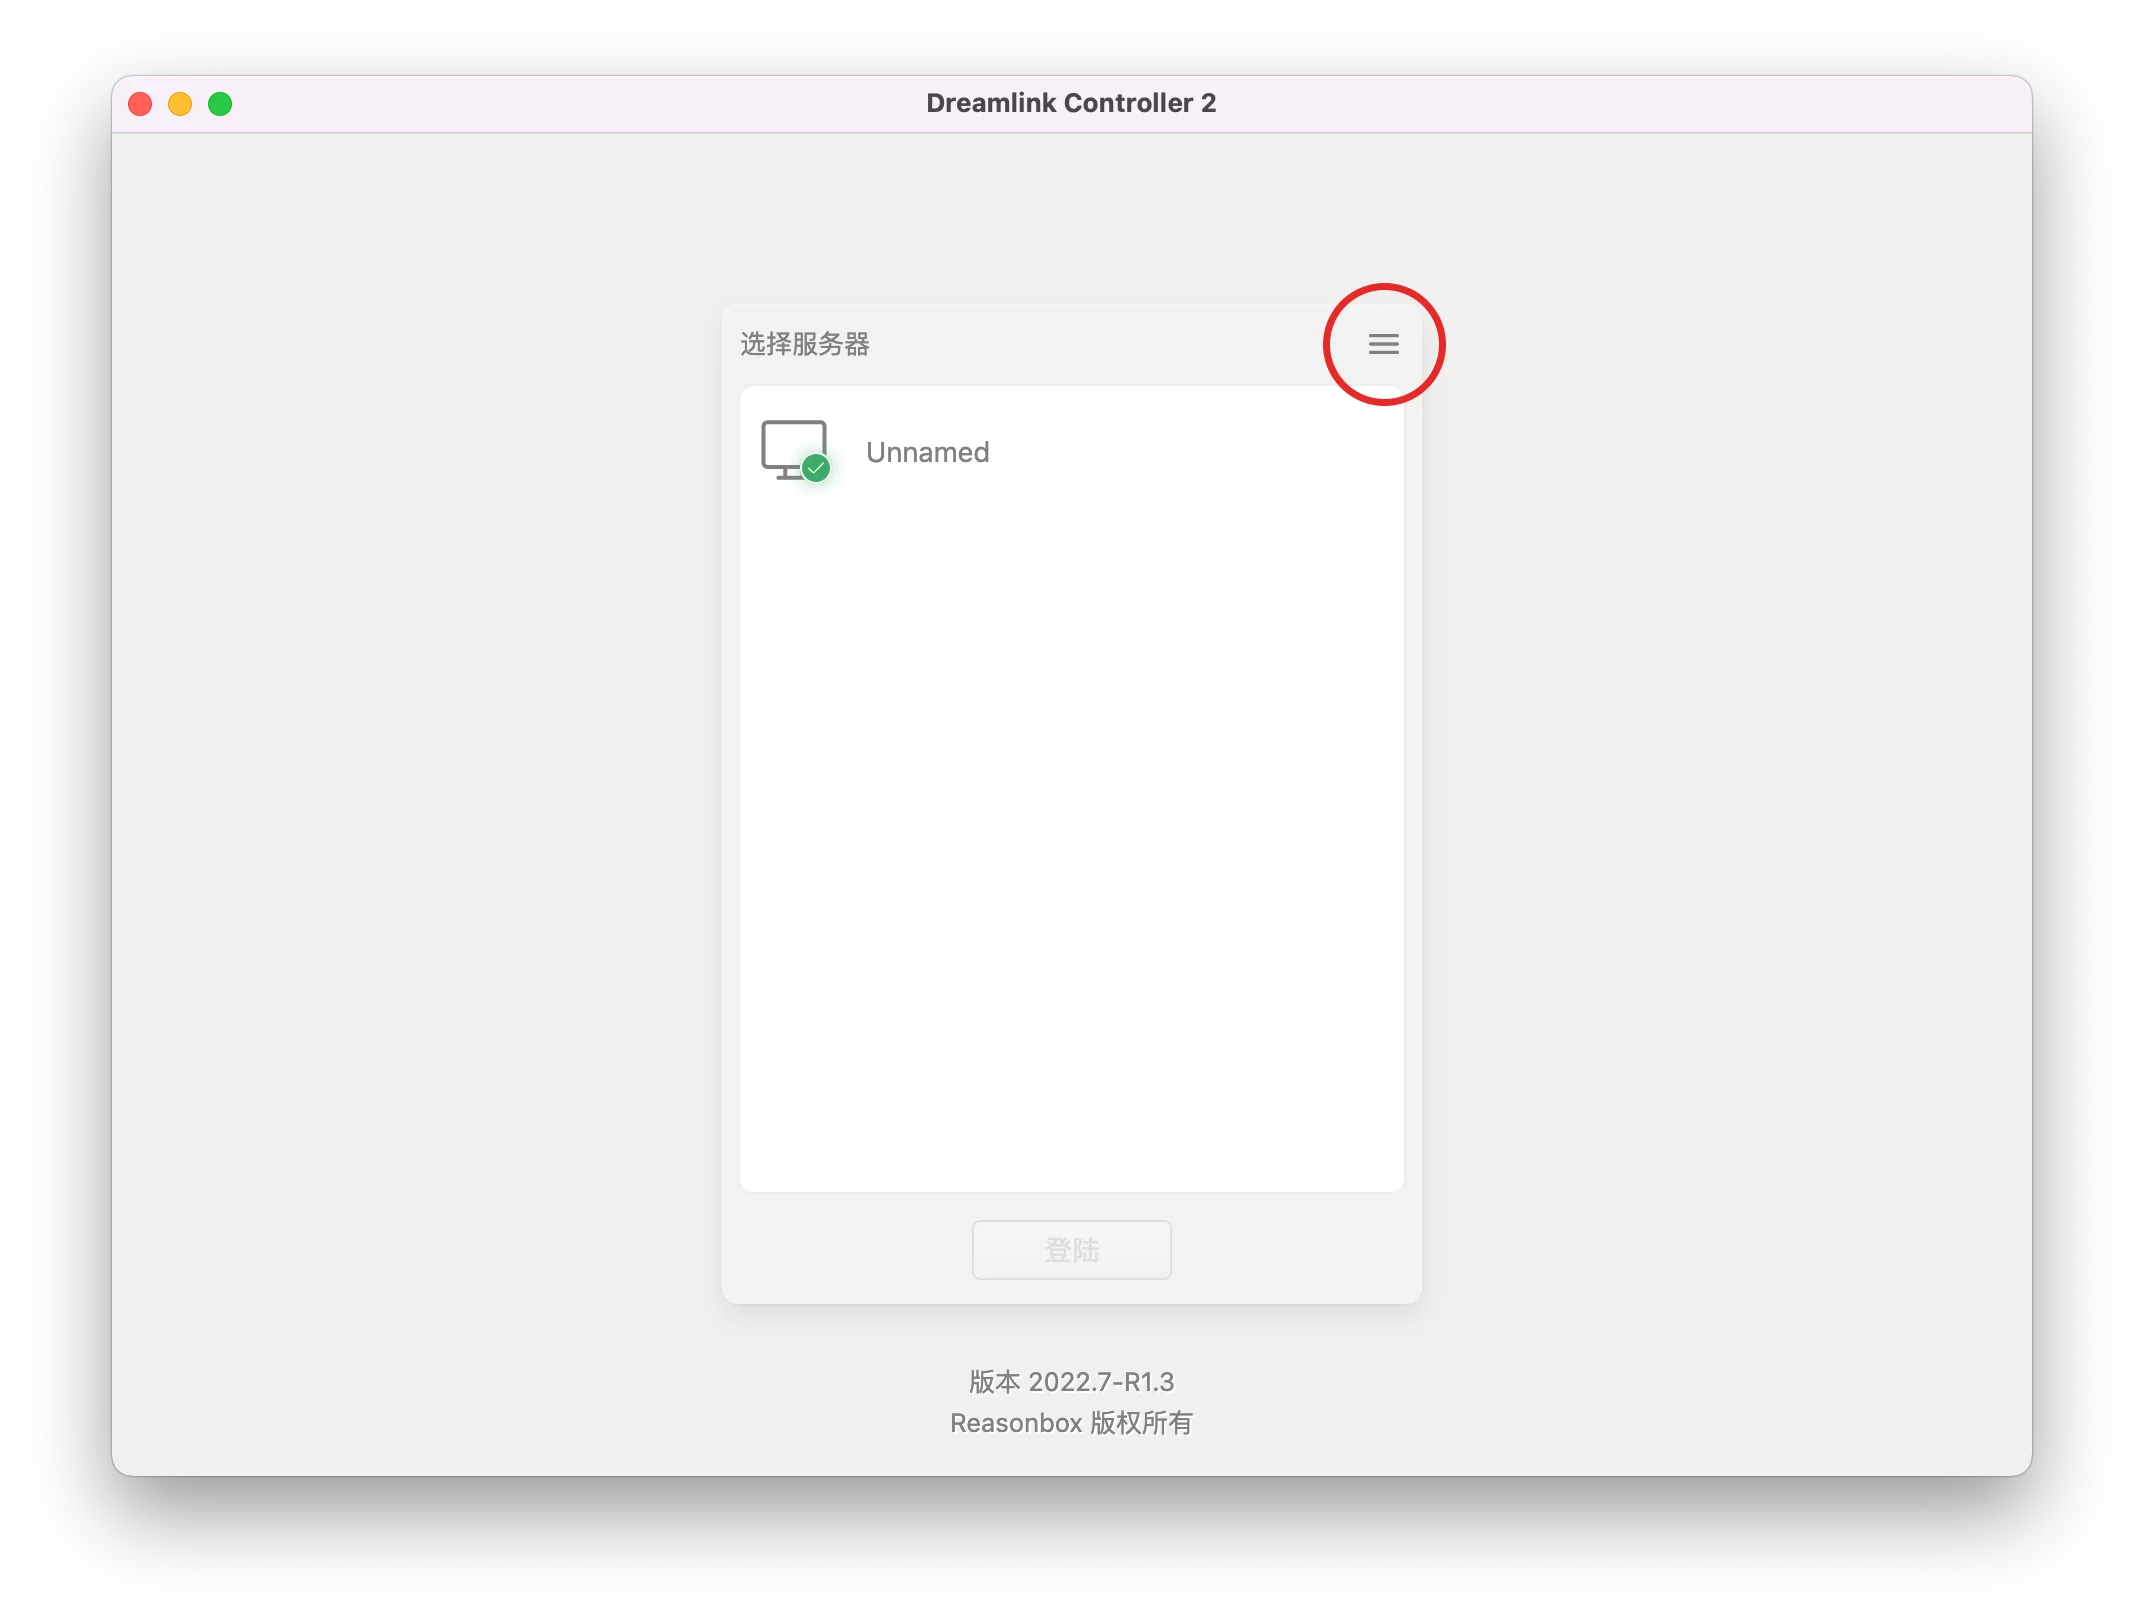 Screenshot of the hamburger button prompt on the login interface